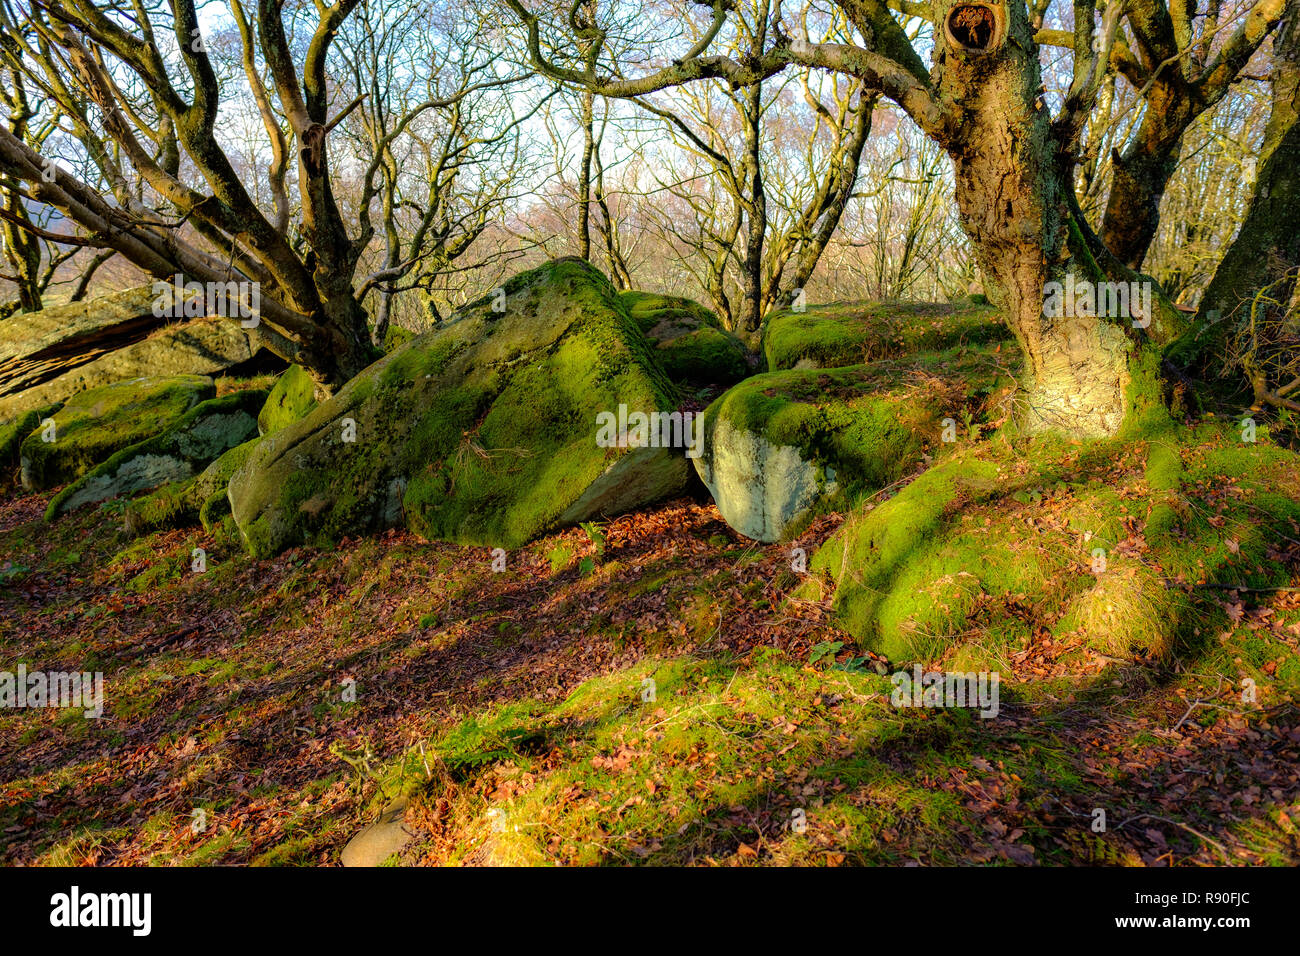 English Woodland with Oak Trees. Forest Floow, Moss and Rocks. Woodland Floor Stock Photo